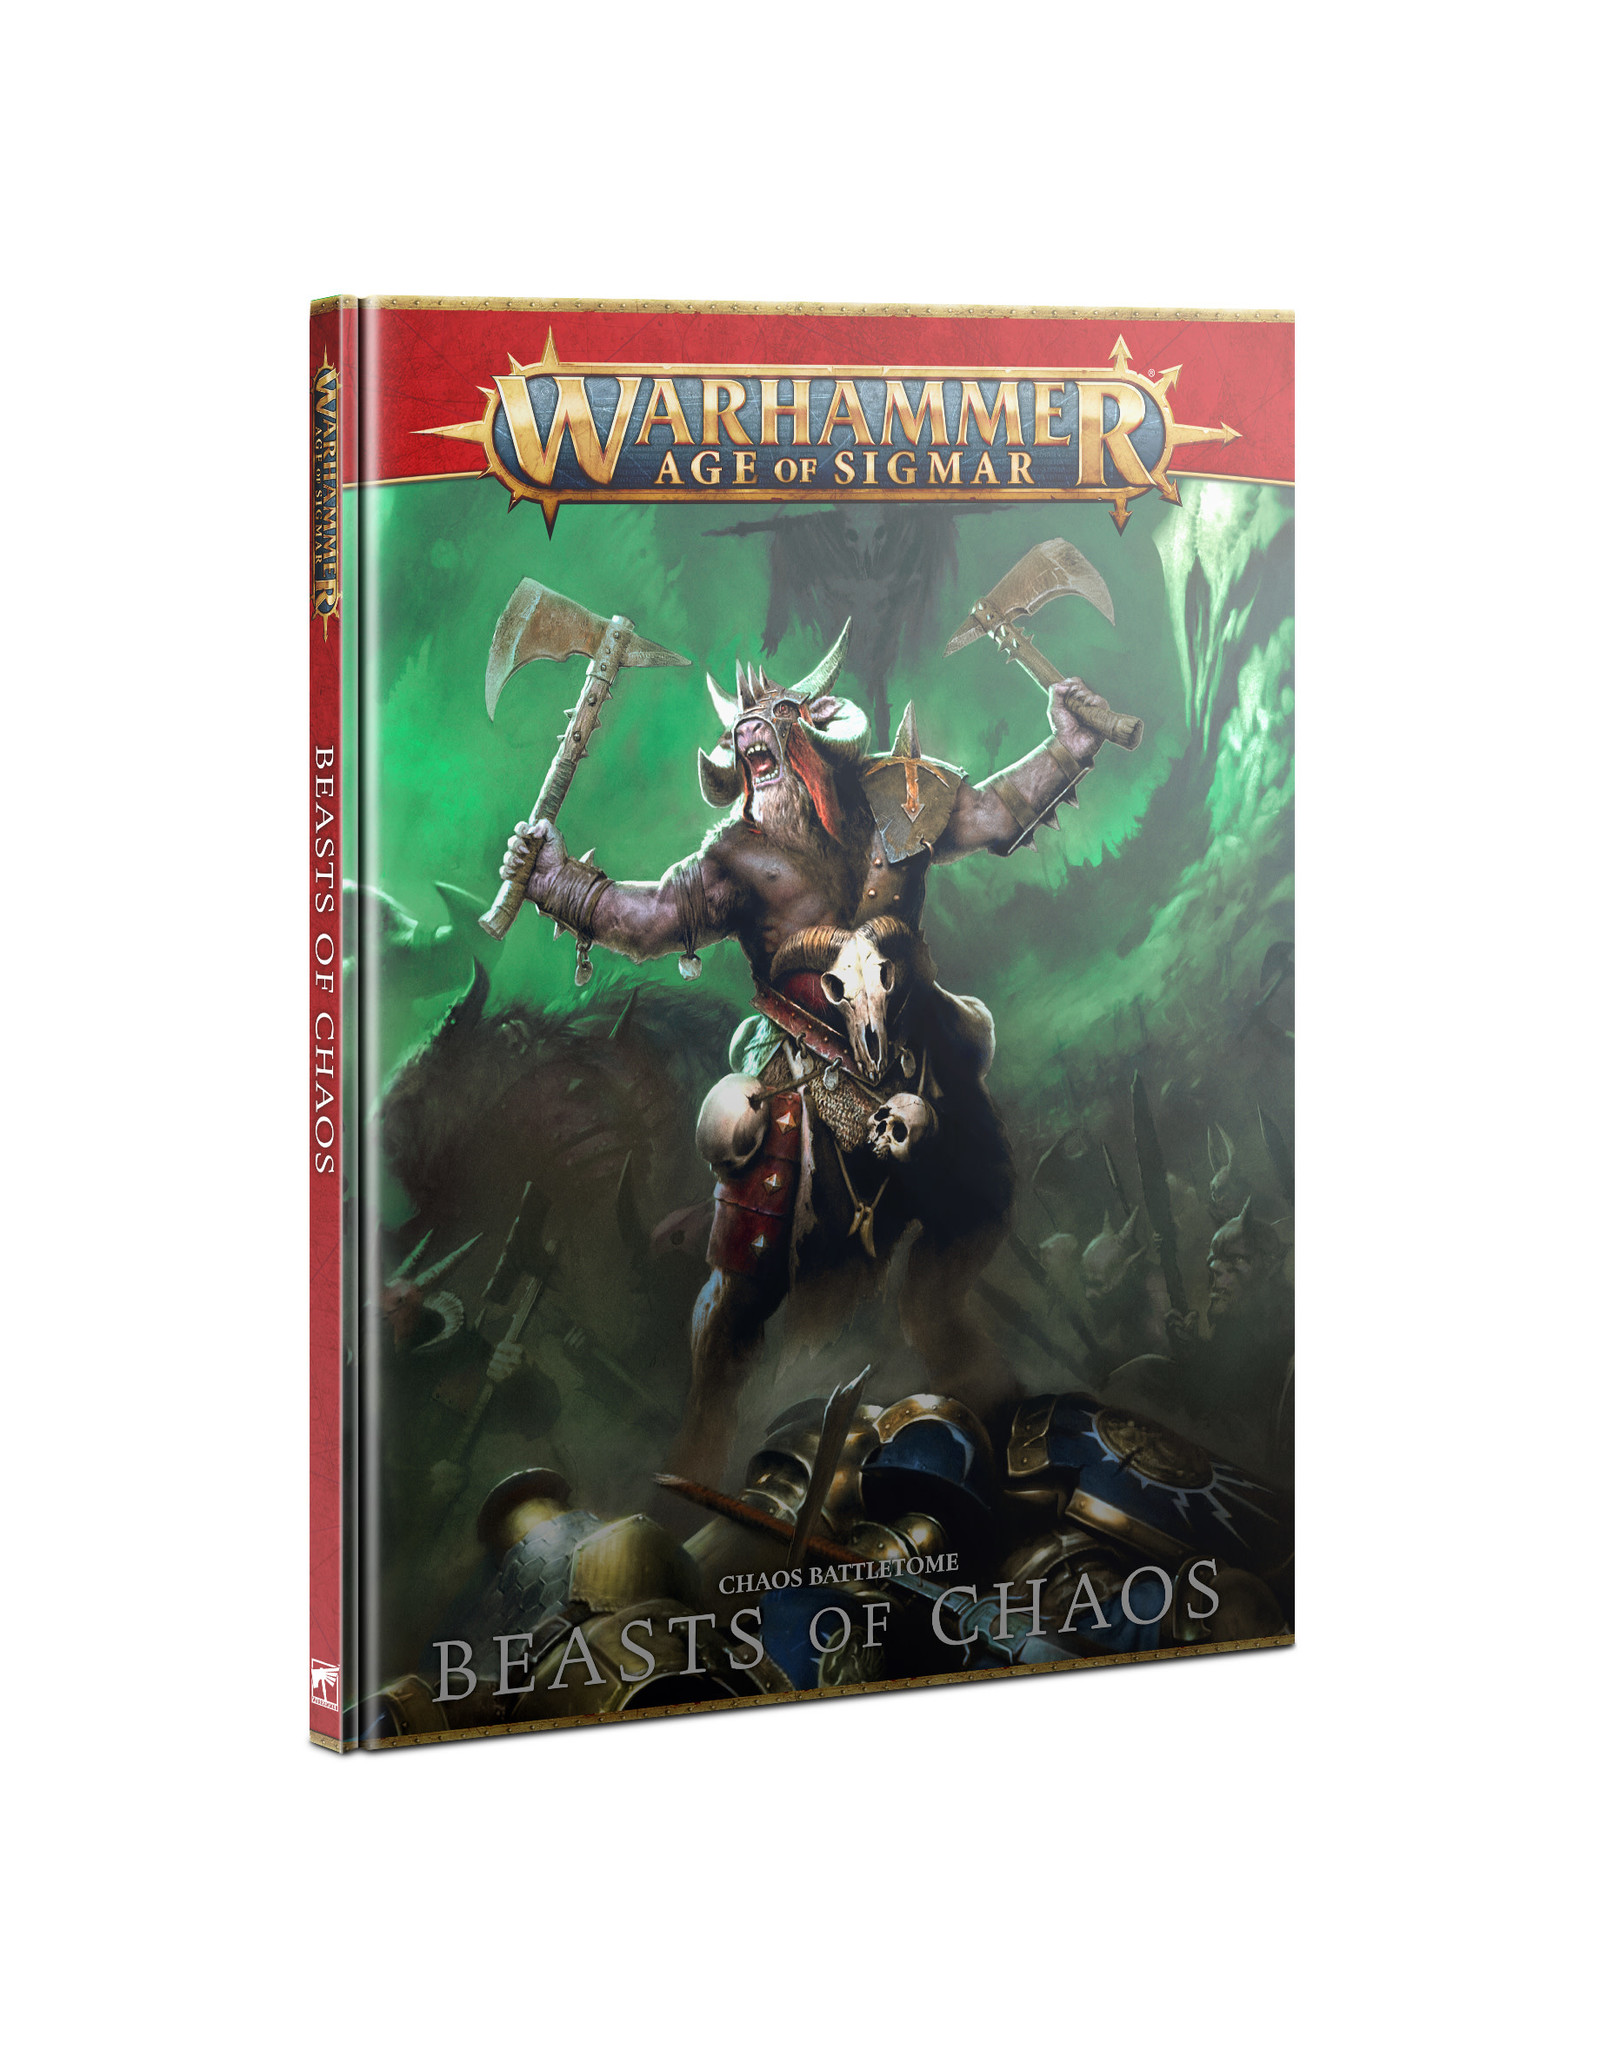 Games Workshop Battletome Beasts of Chaos